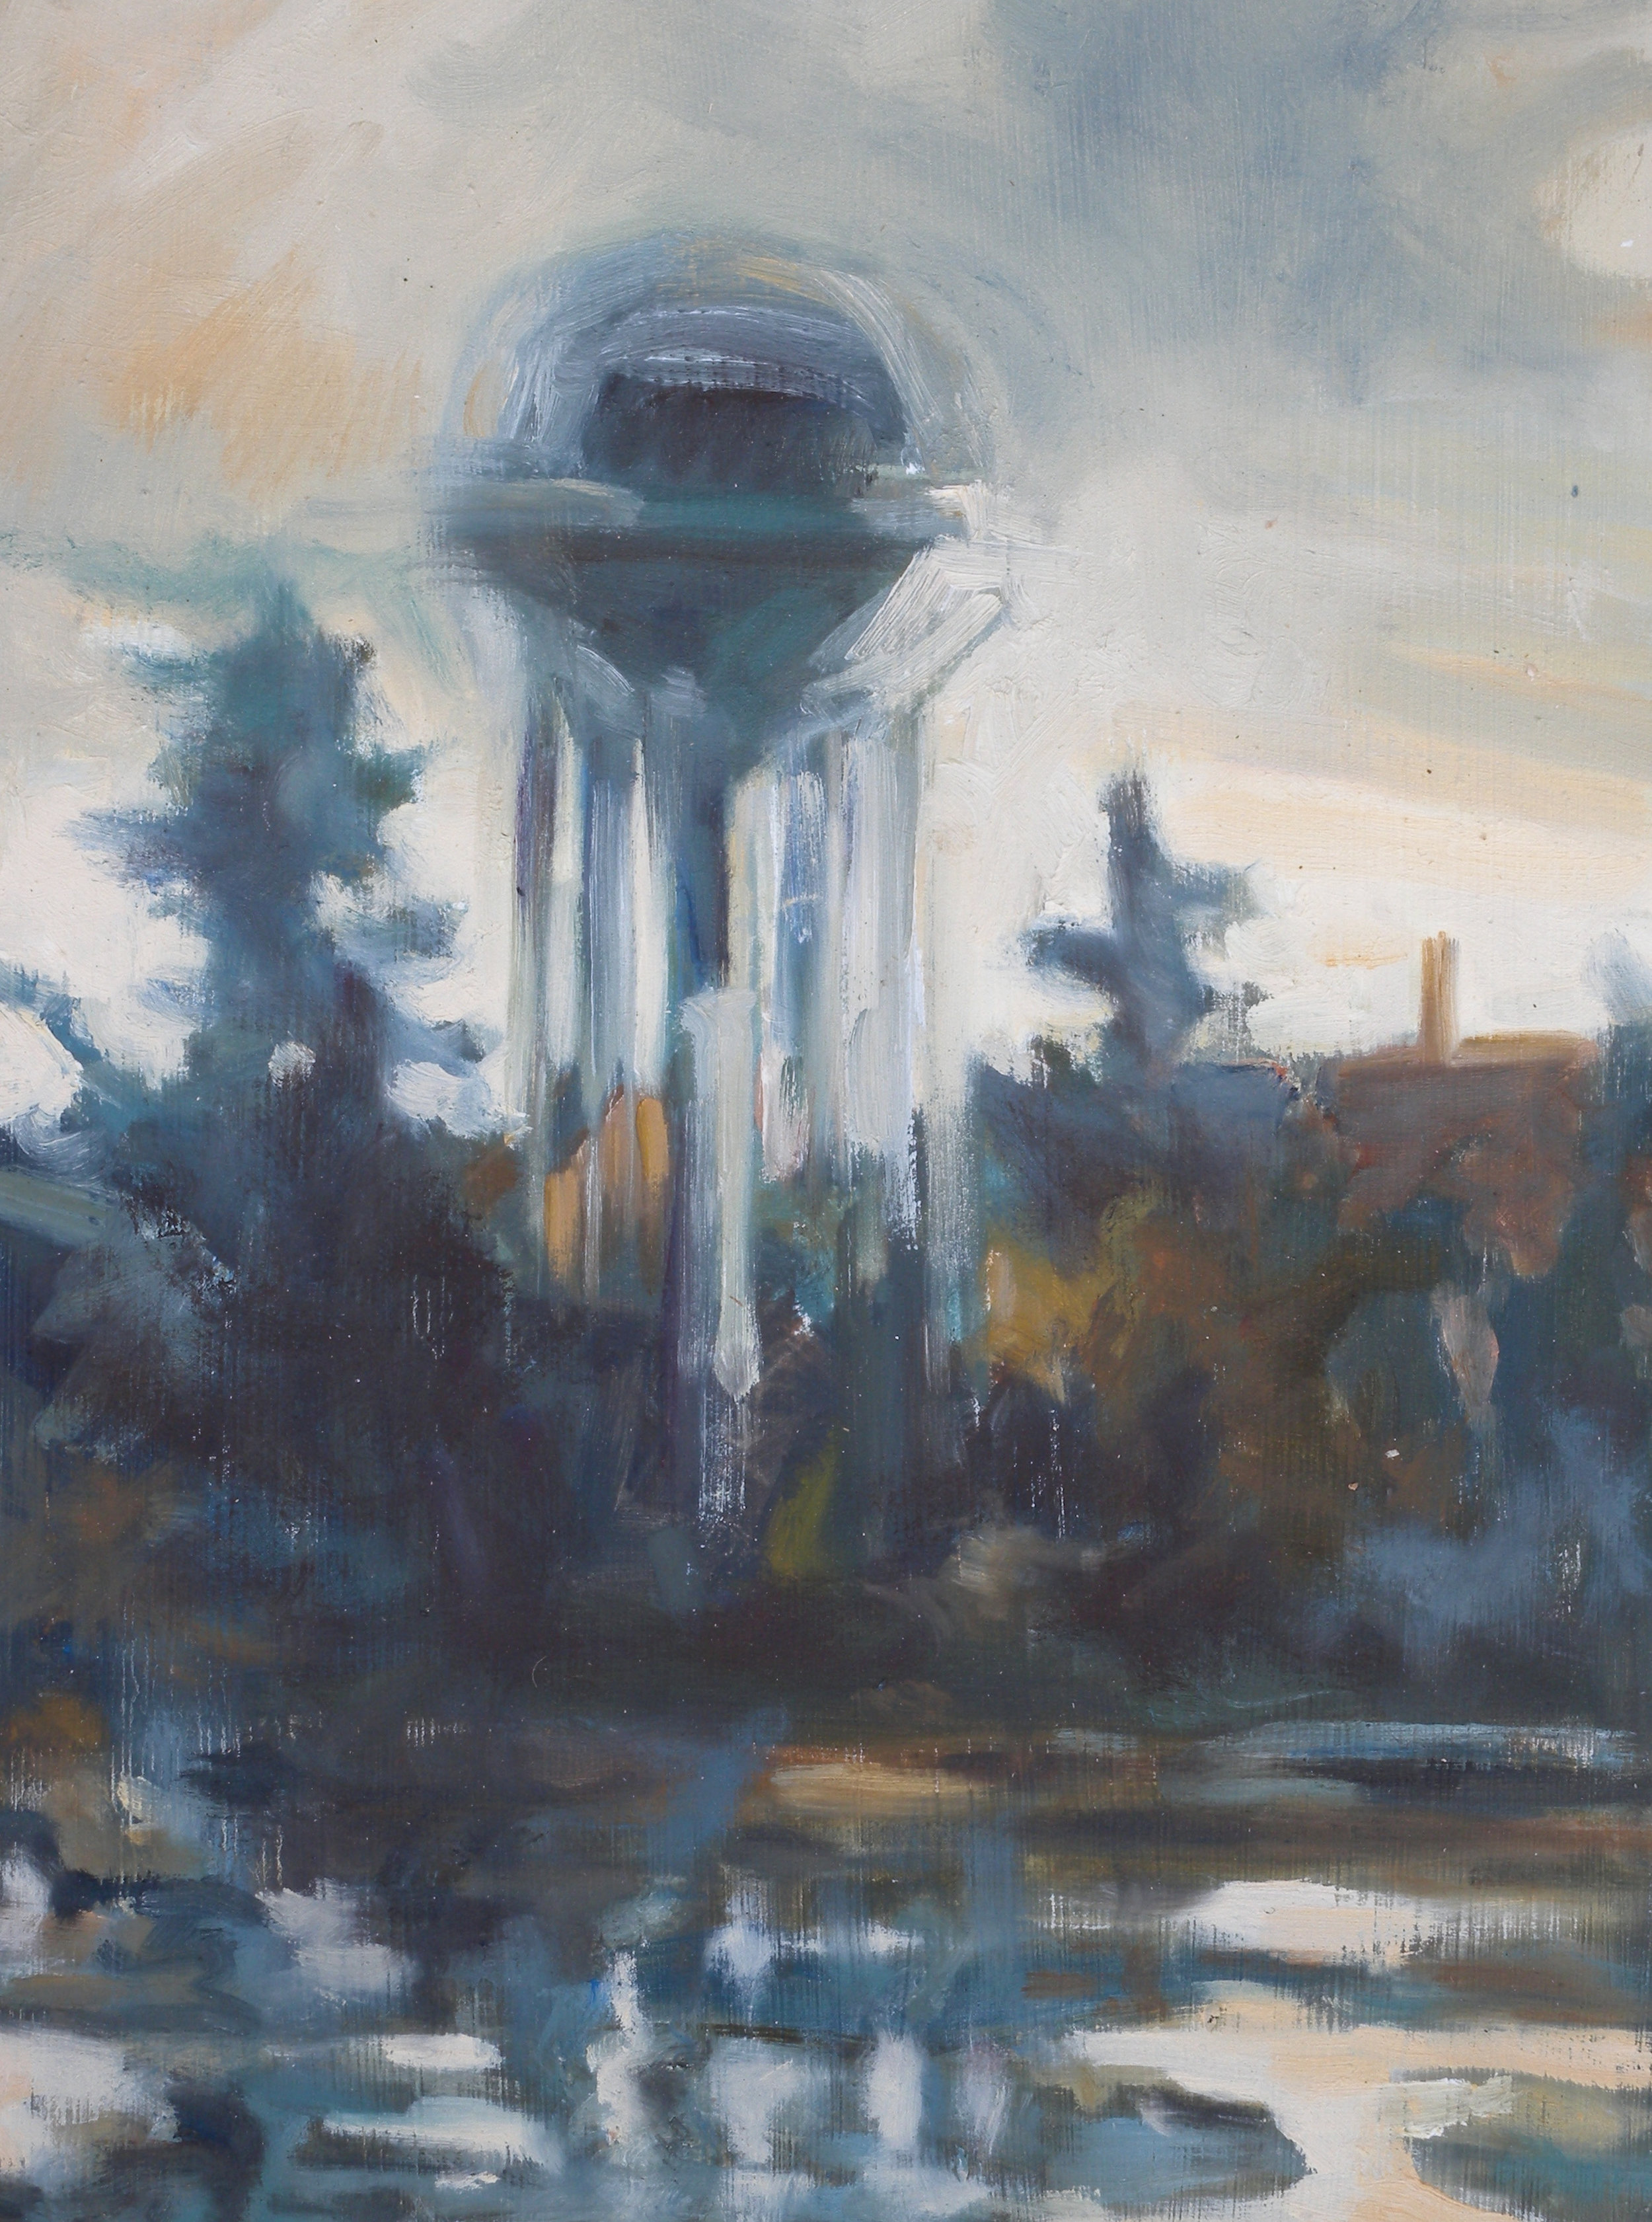 Water Tower, oils, 14 x 16